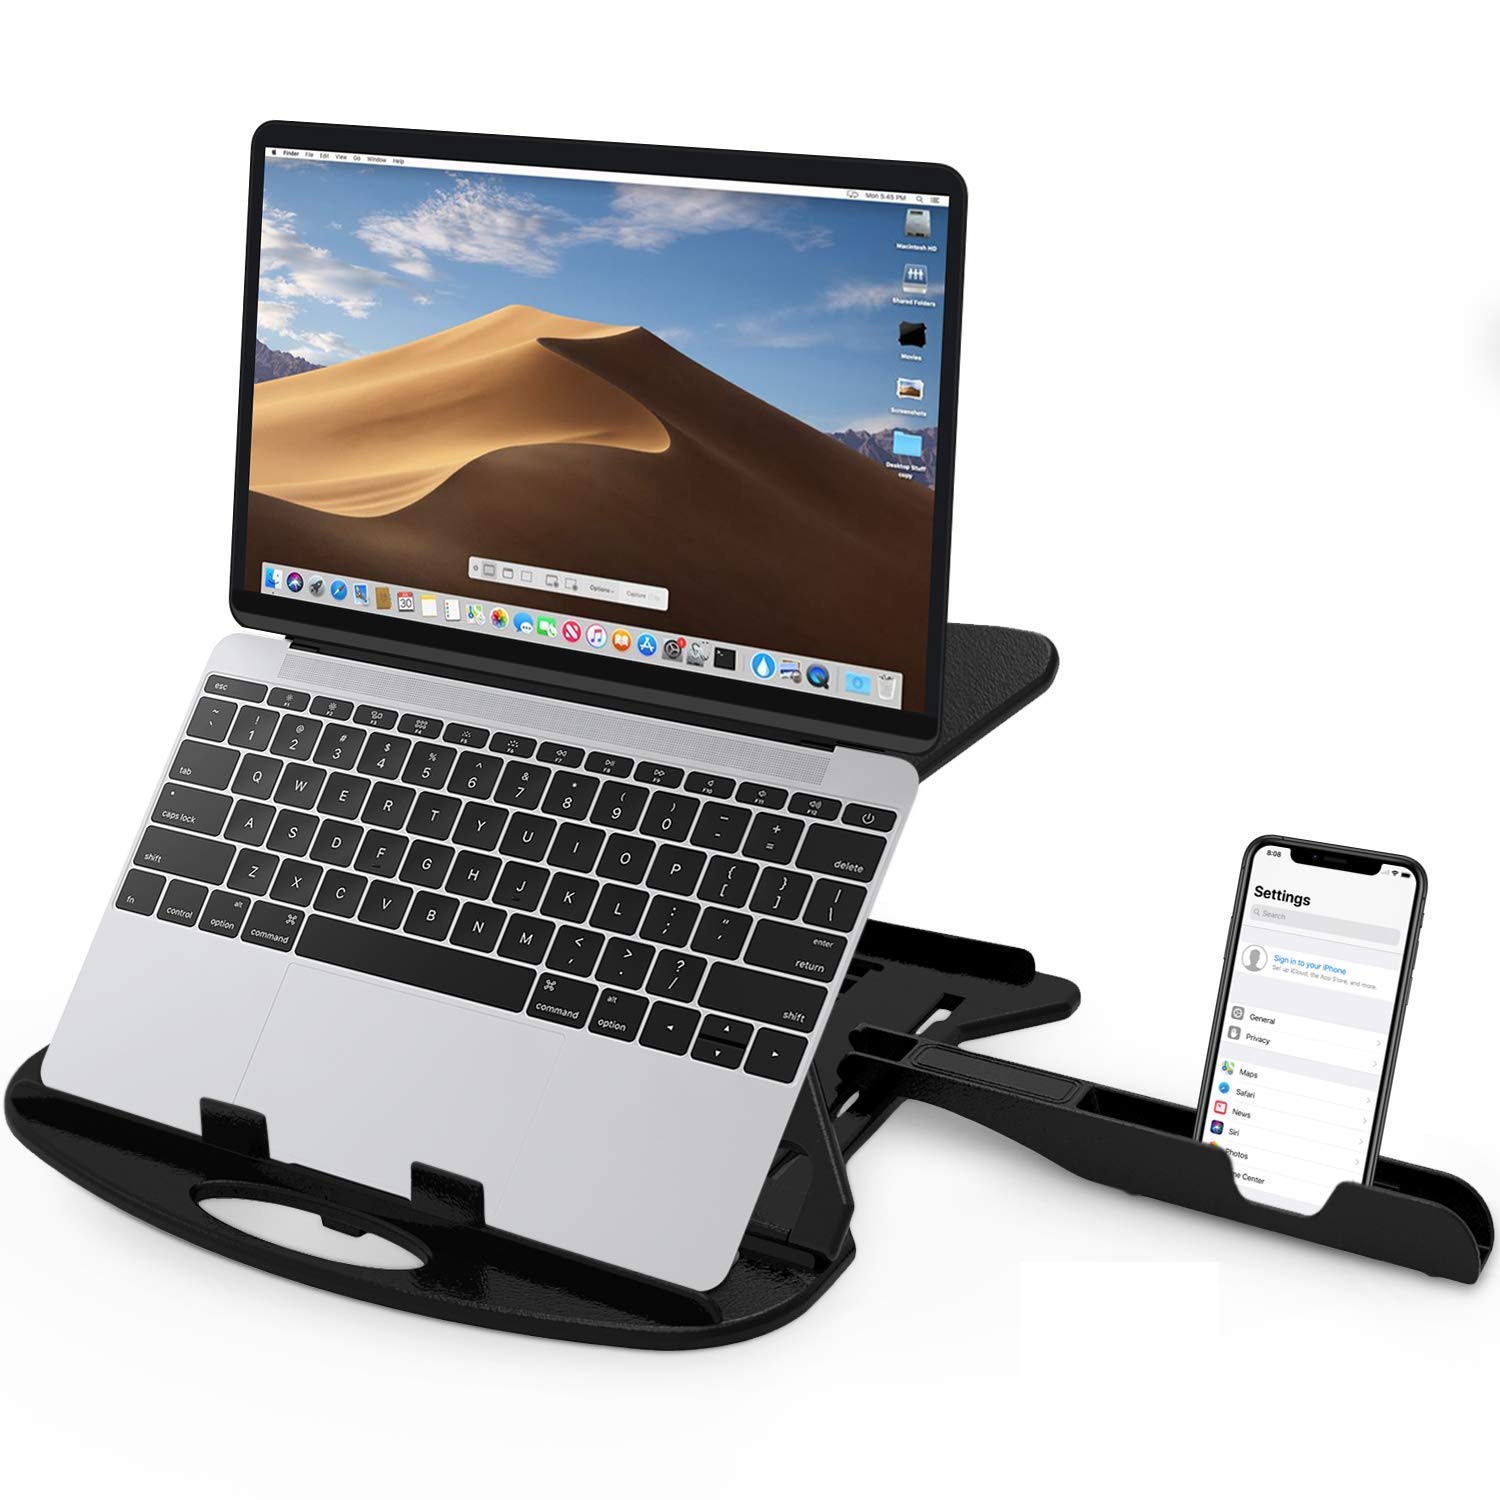 STRIFF Adjustable Laptop Stand Patented Riser